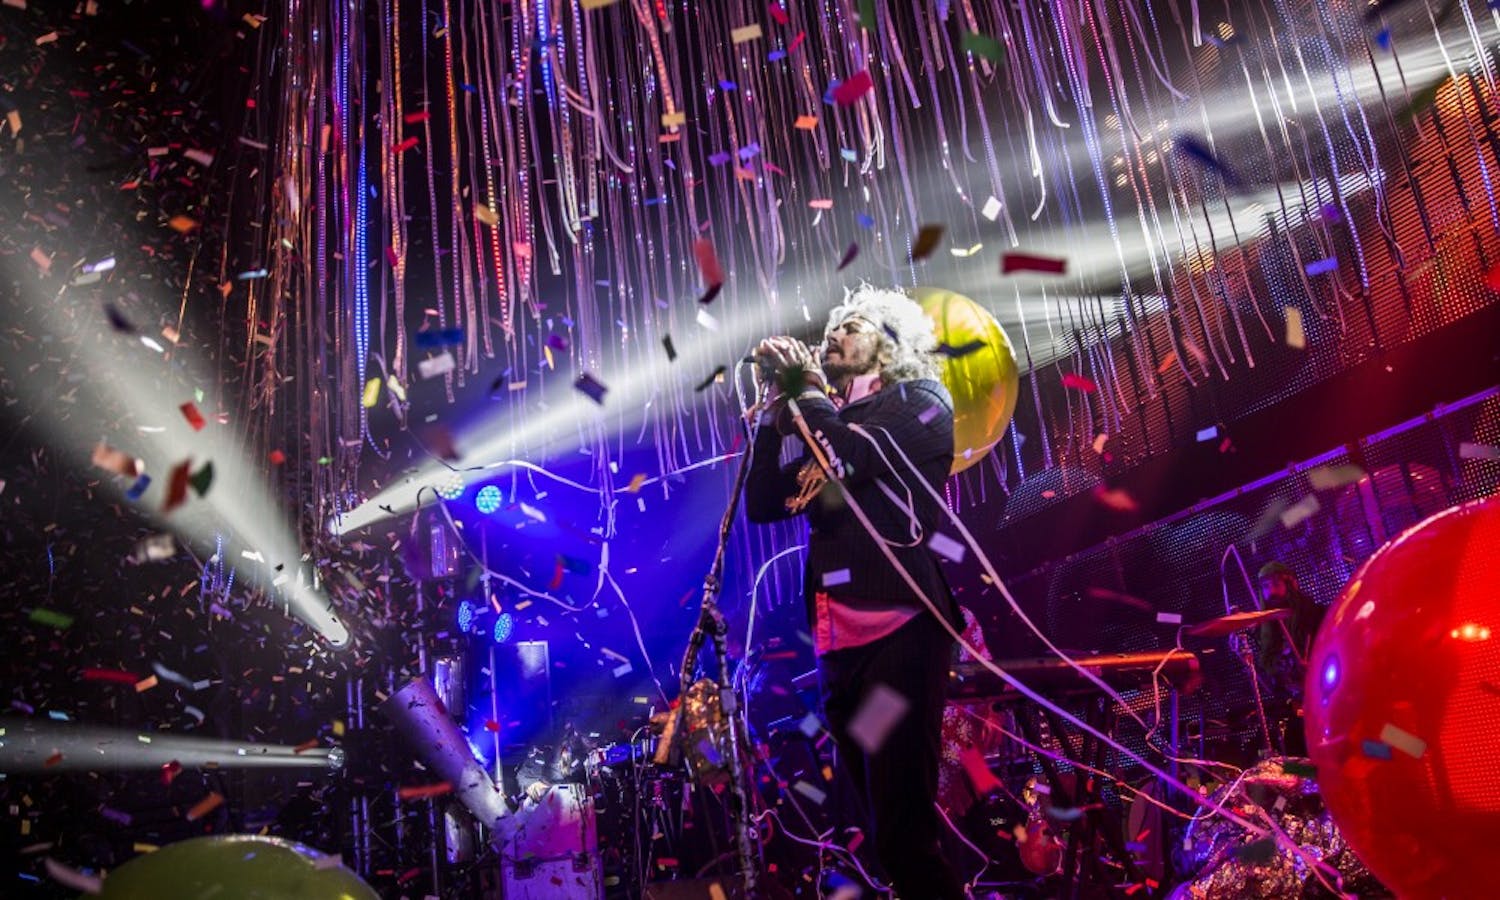 Gallery: The Flaming Lips